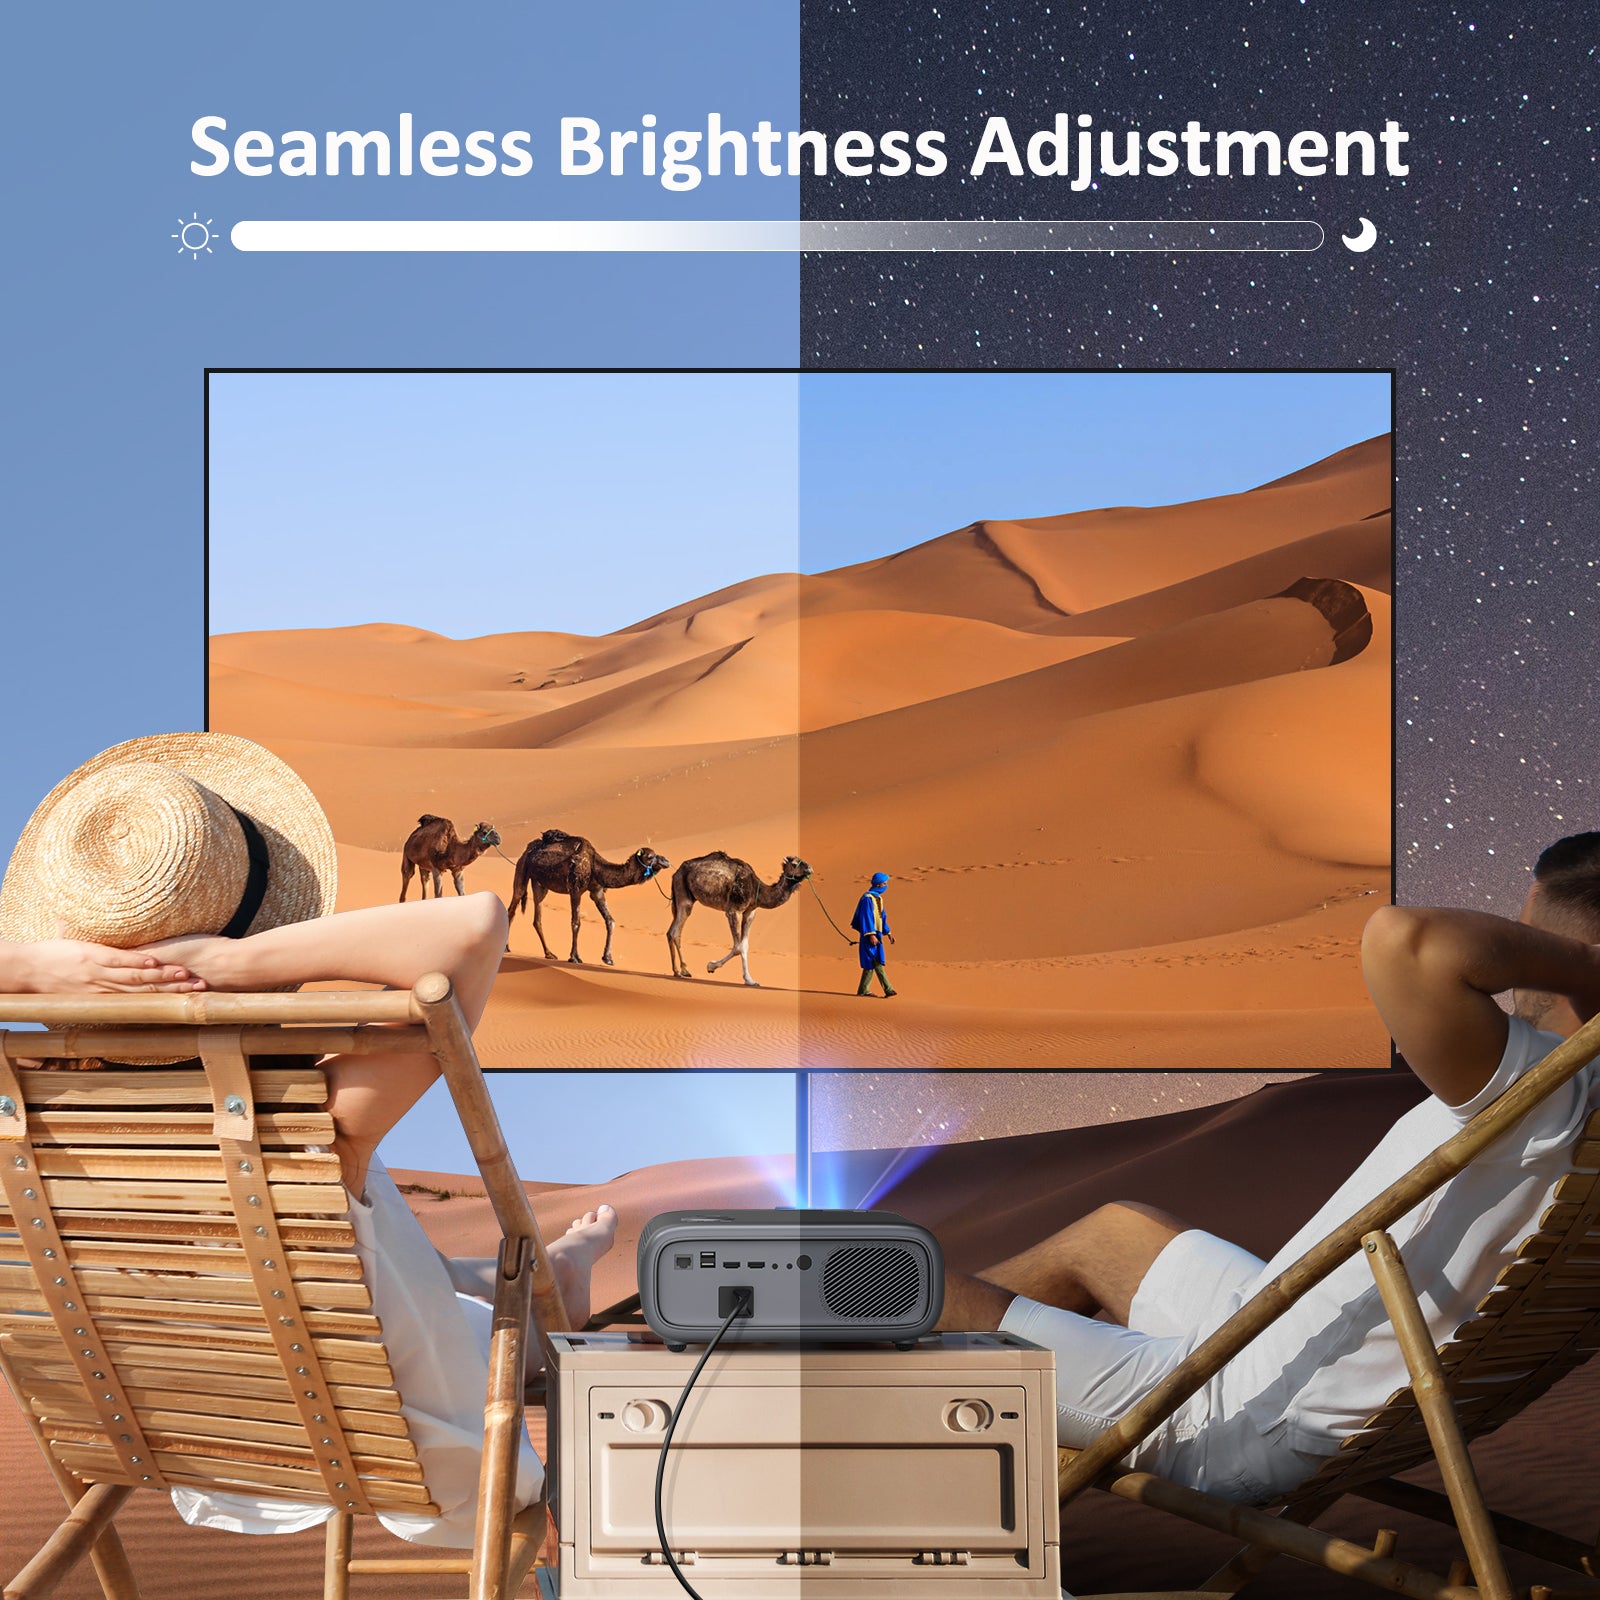 Seamlessly adjusts brightness based on natural light changes from day to night for two viewers.